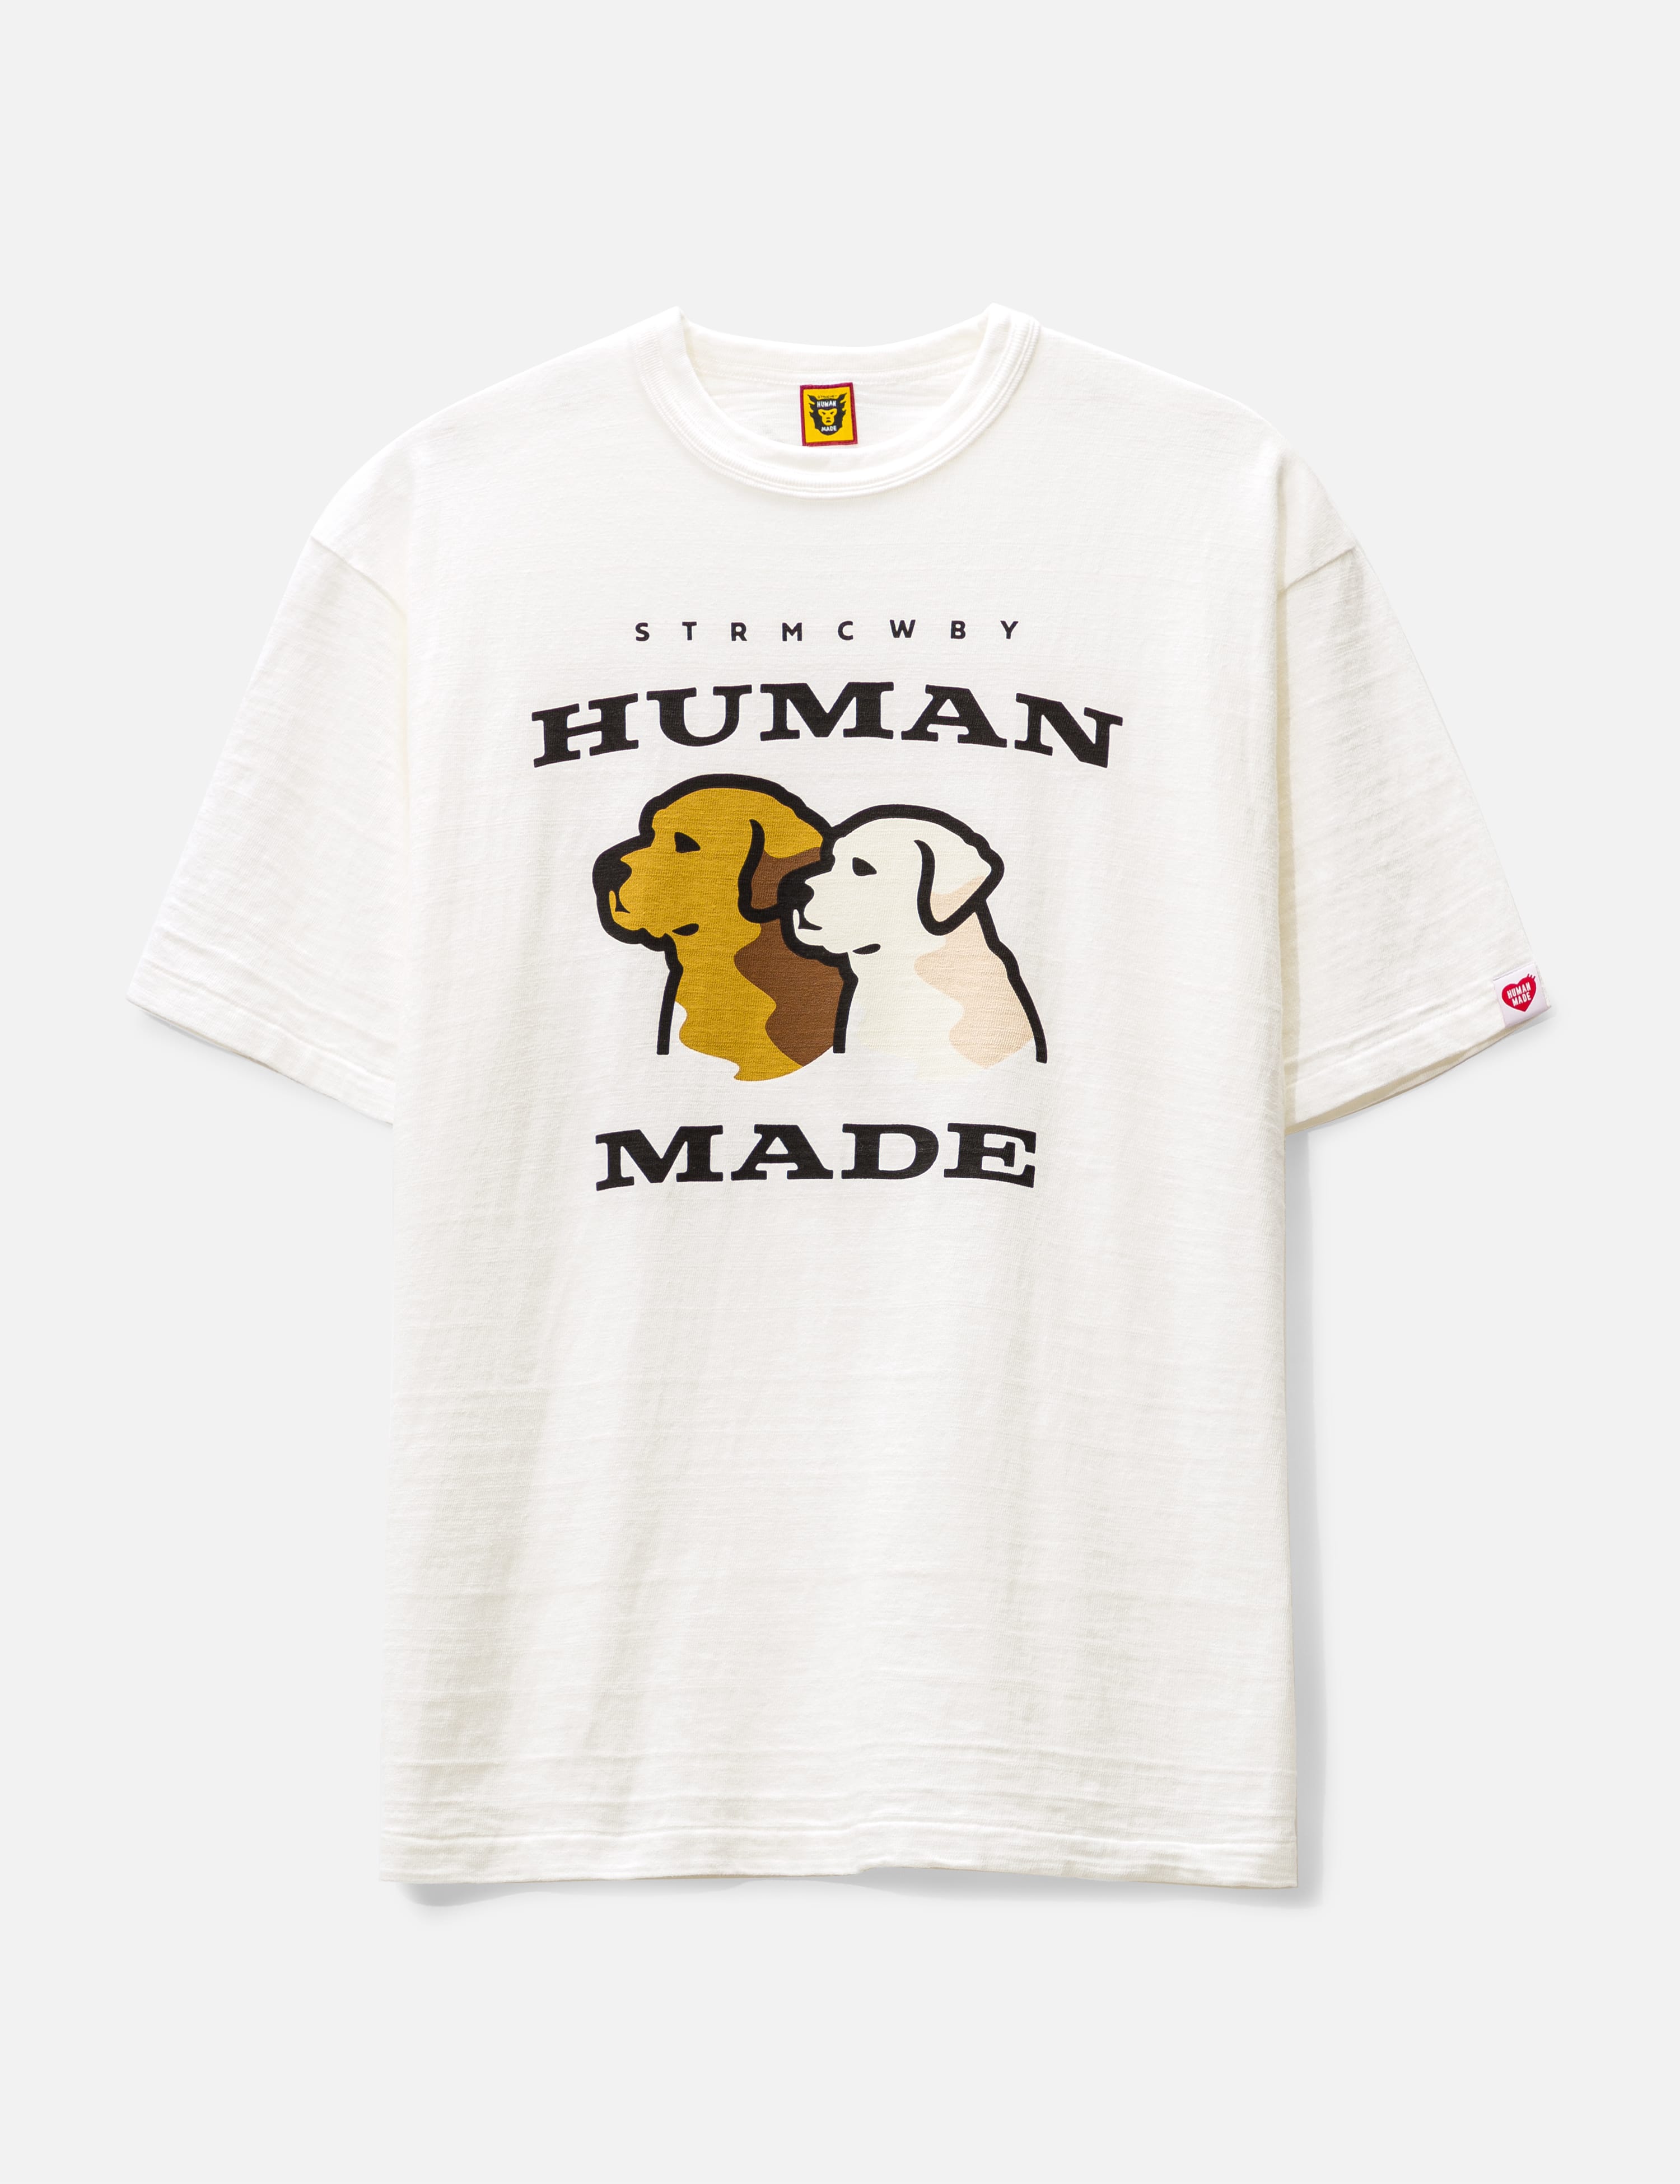 Human Made - Graphic T-shirt #12 | HBX - Globally Curated Fashion